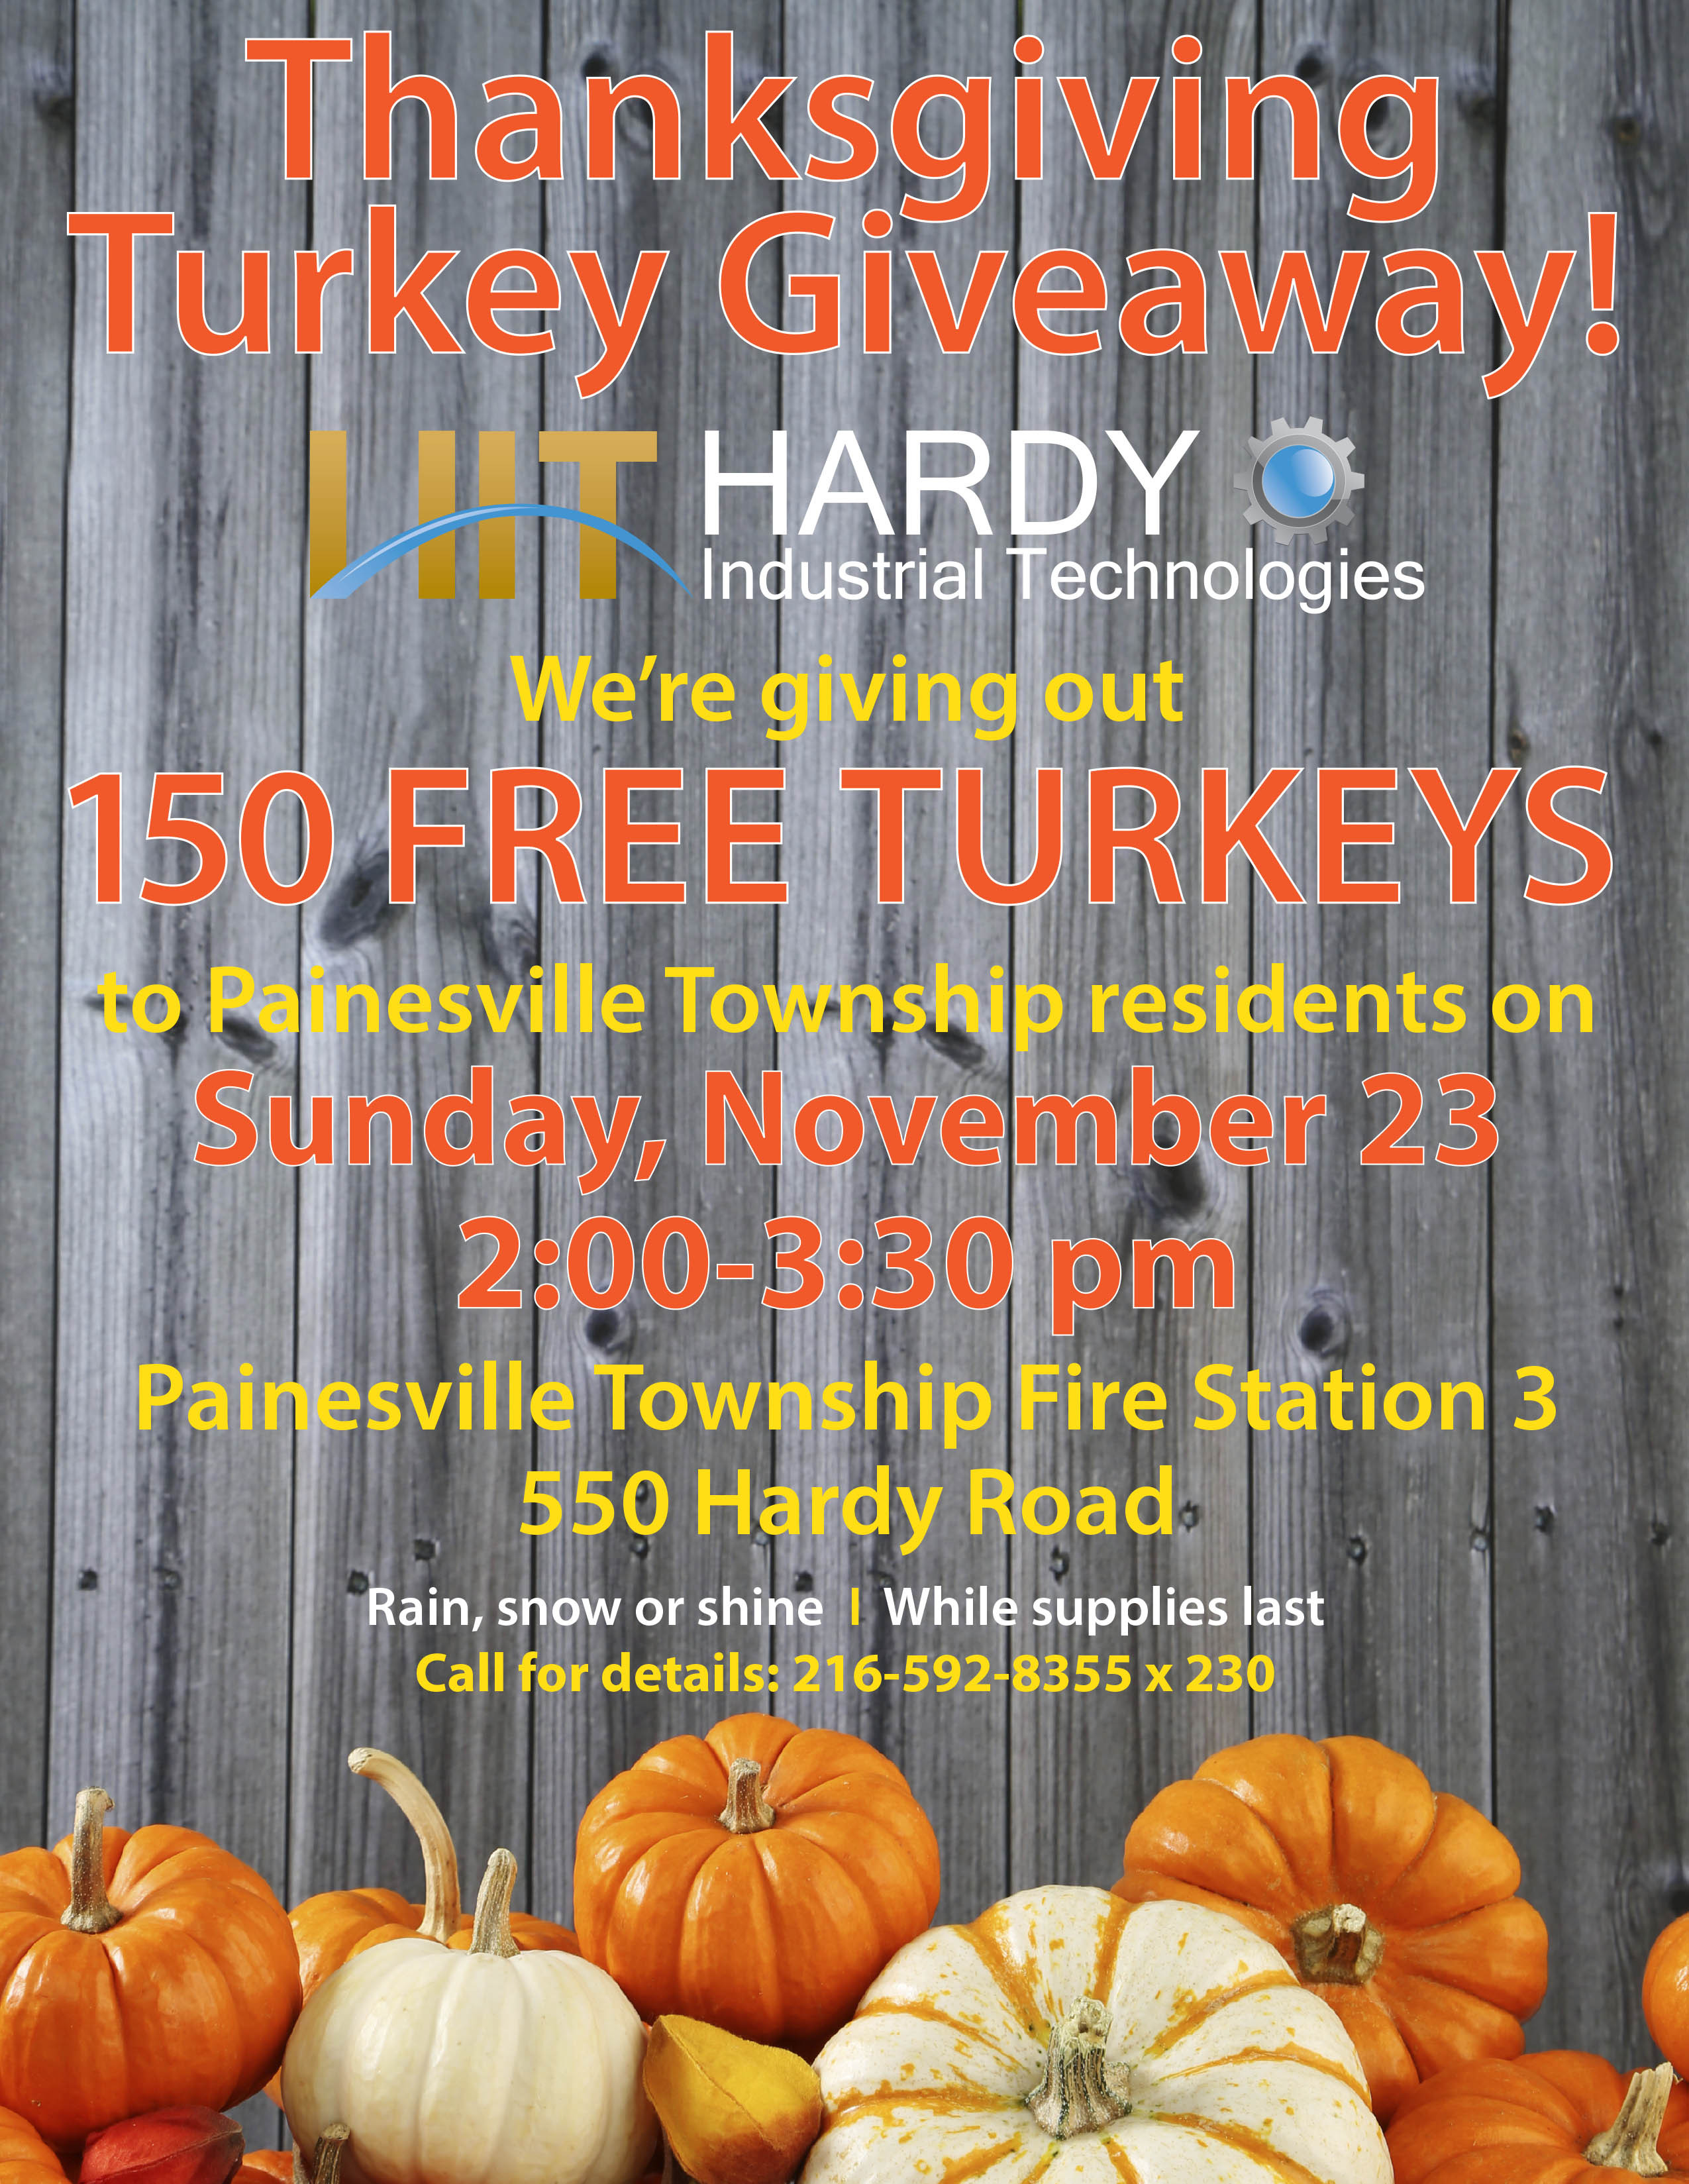 Thanksgiving Turkey Giveaway
 Annual Thanksgiving Turkey Giveaway in Painesville